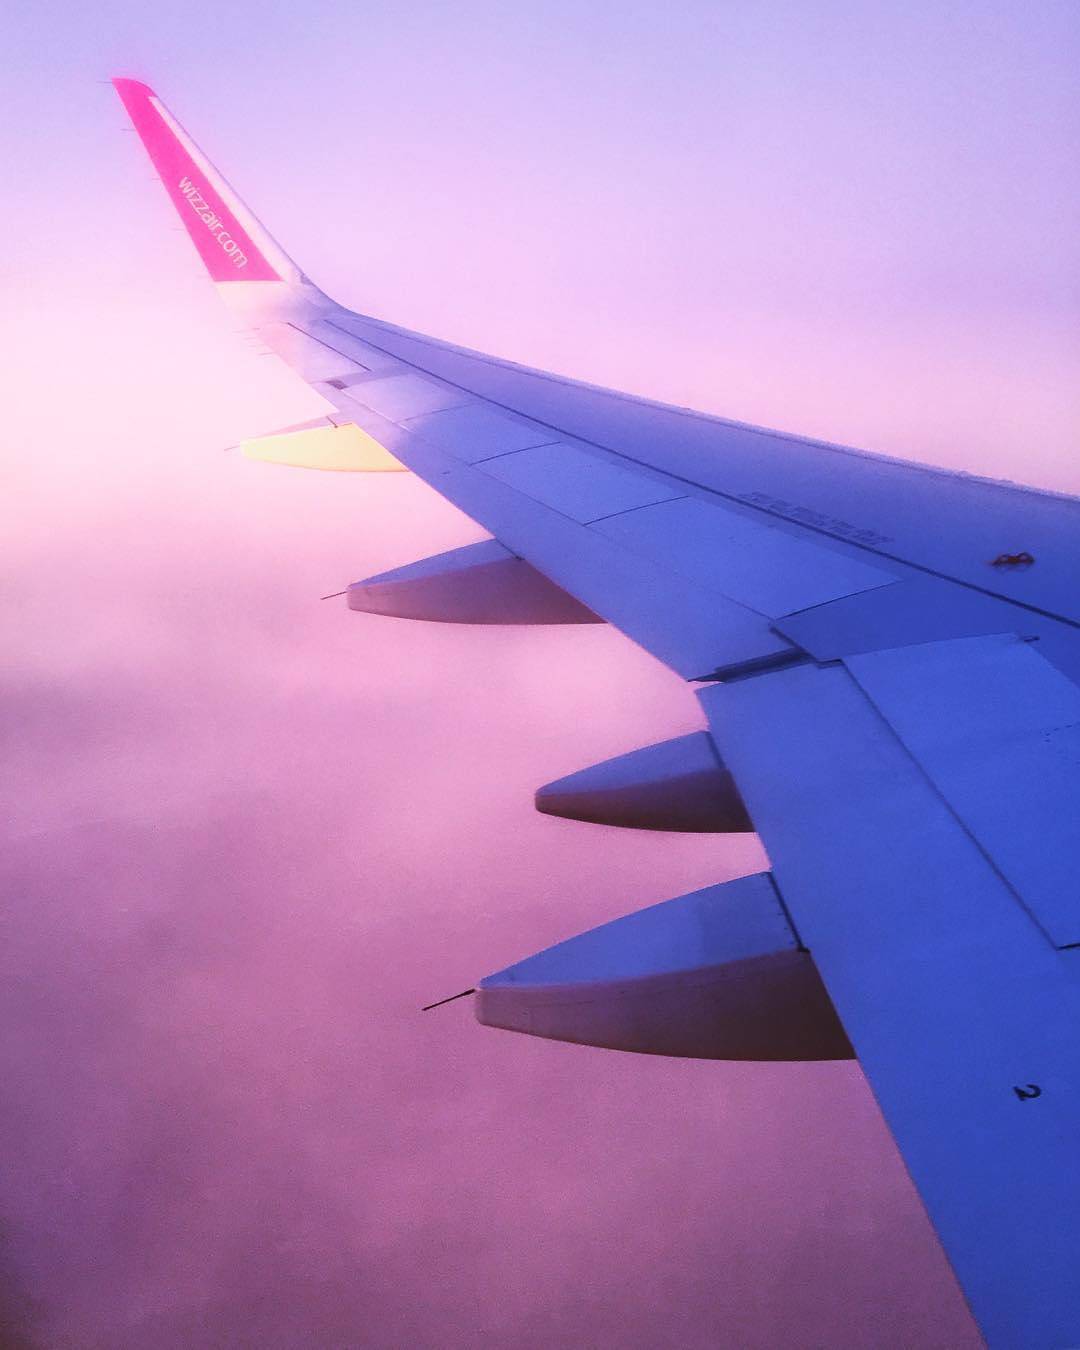 Wizz Air - Start your #NewYear with a journey! Although before boarding the plane, please check your flight status ➡ Photo credit cissibee